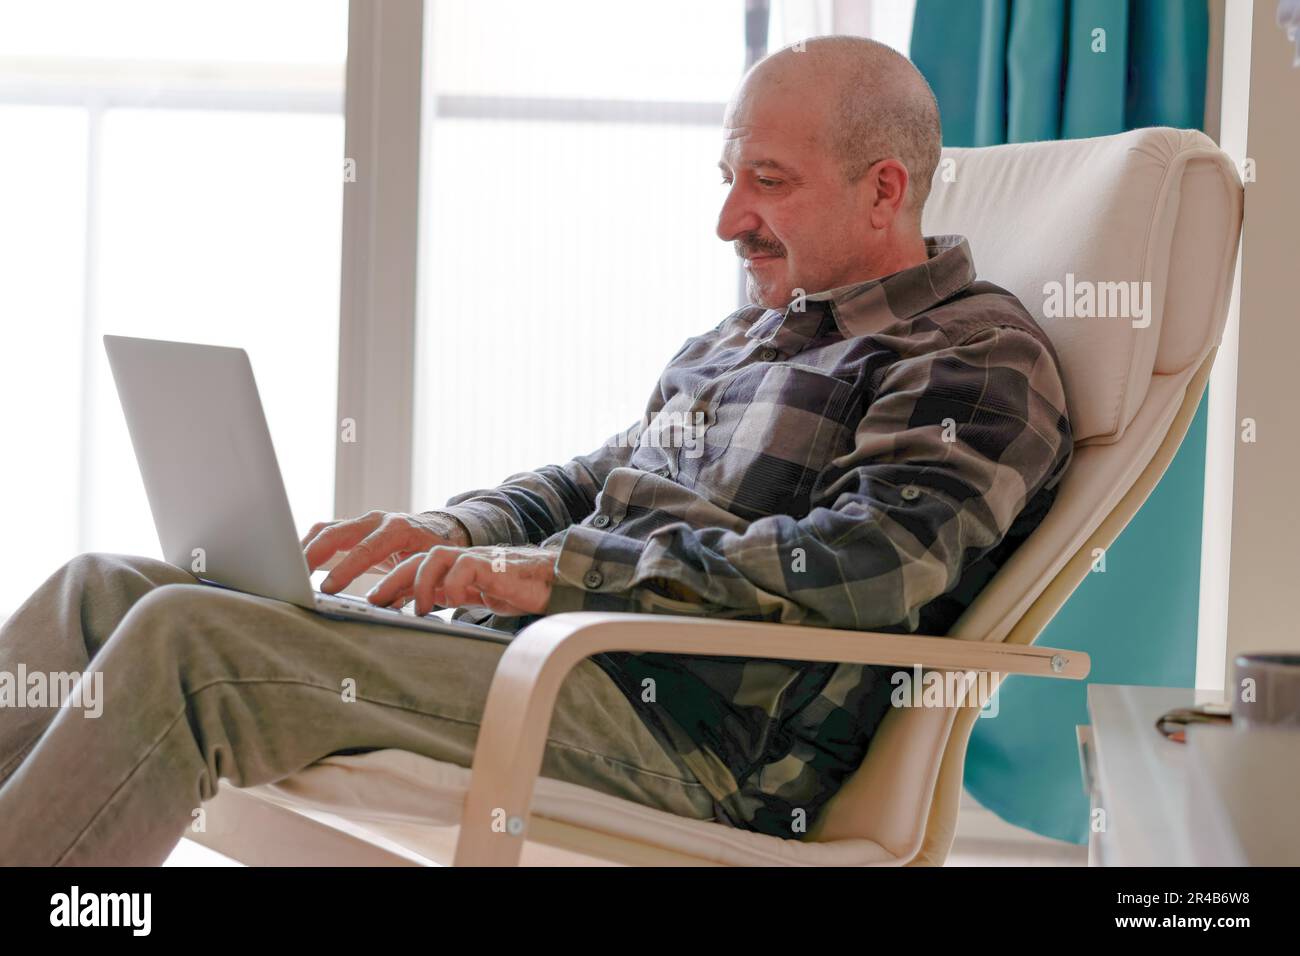 Man with moustache, plaid shirt and jeans sitting in an armchair in his living room using his laptop computer Stock Photo